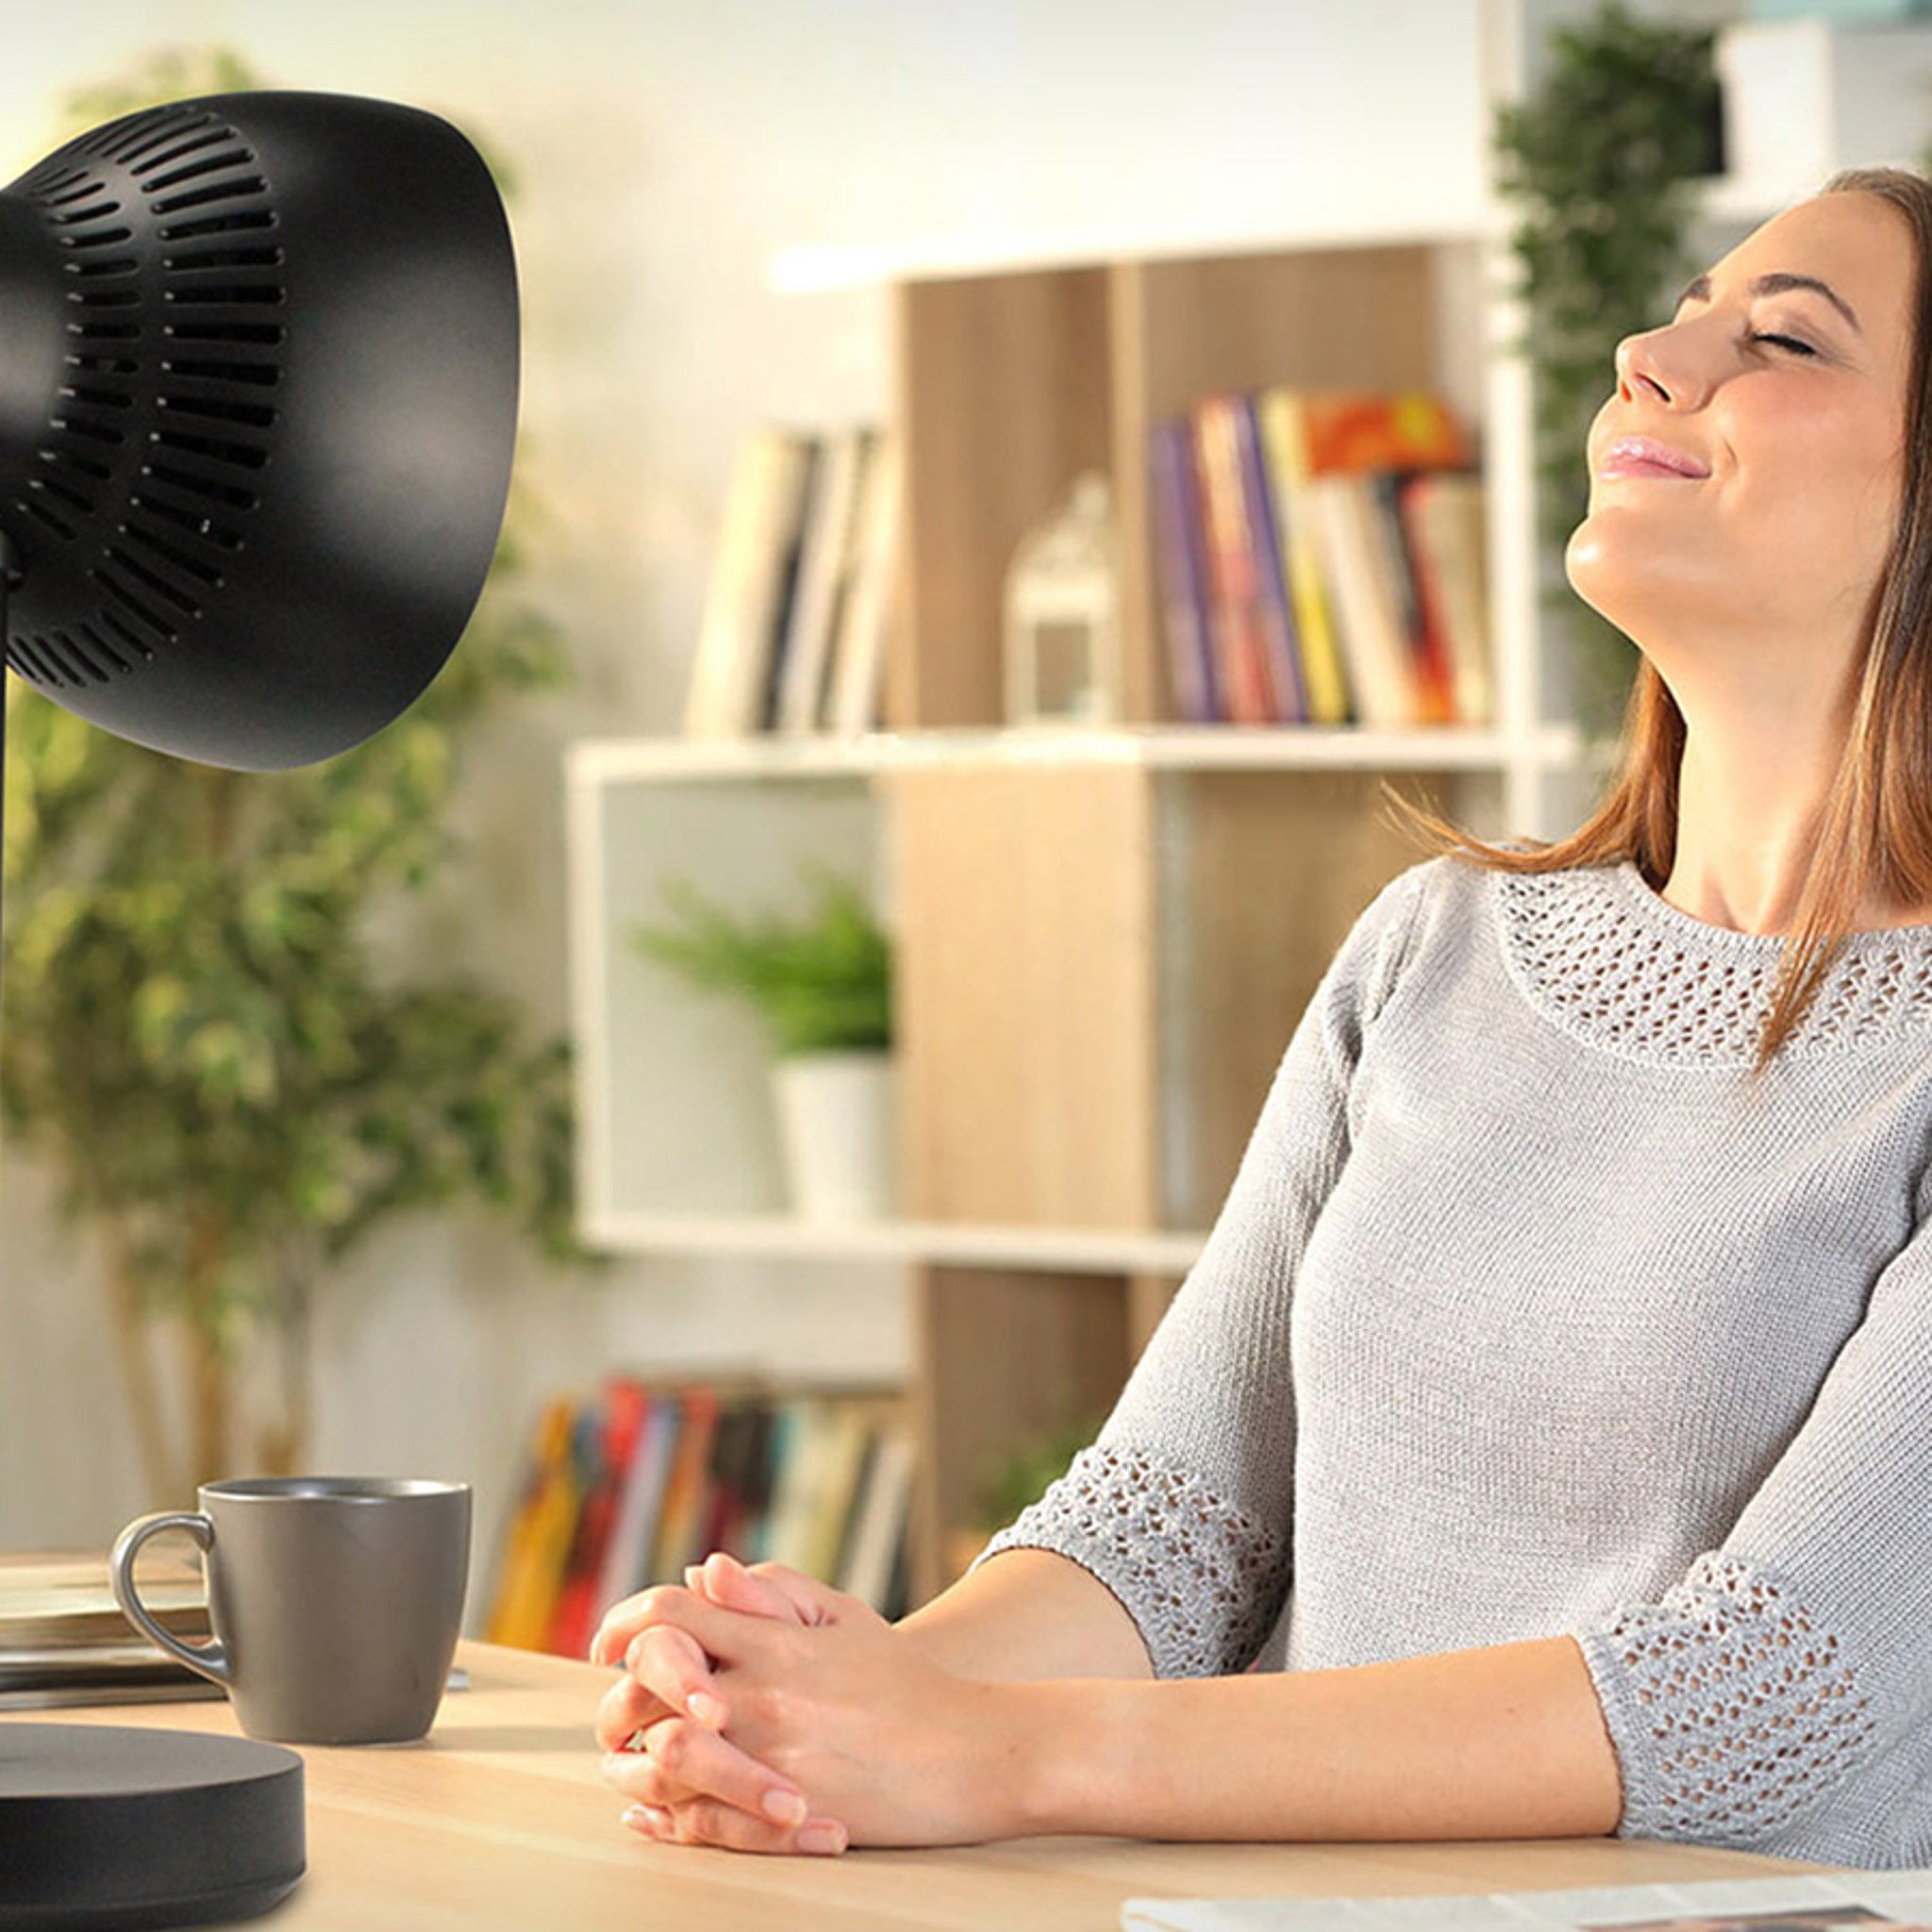 This Personal Desk Heater Will Keep You Comfortable All Winter Long